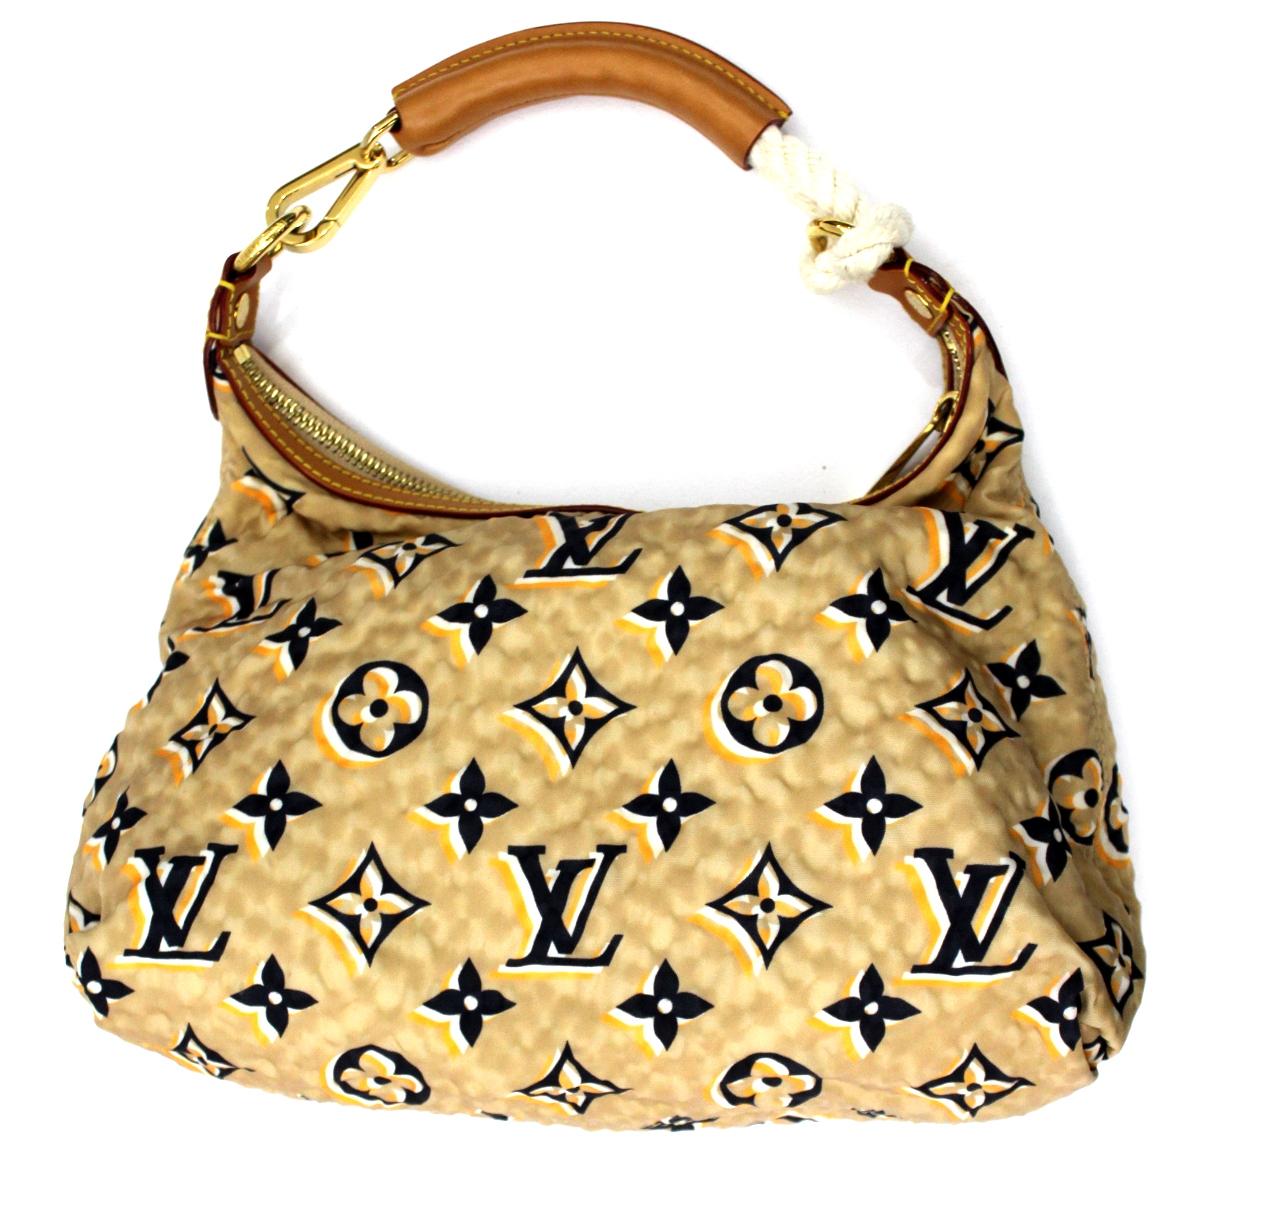 The Louis Vuitton Limited Edition Navy Nylon PM bag is an extraordinary creation. Marc Jacobs chose to reinterpret the LV Monogram with a triple printed pattern on textured nylon. This beautiful model is combined with caramel-colored leather and